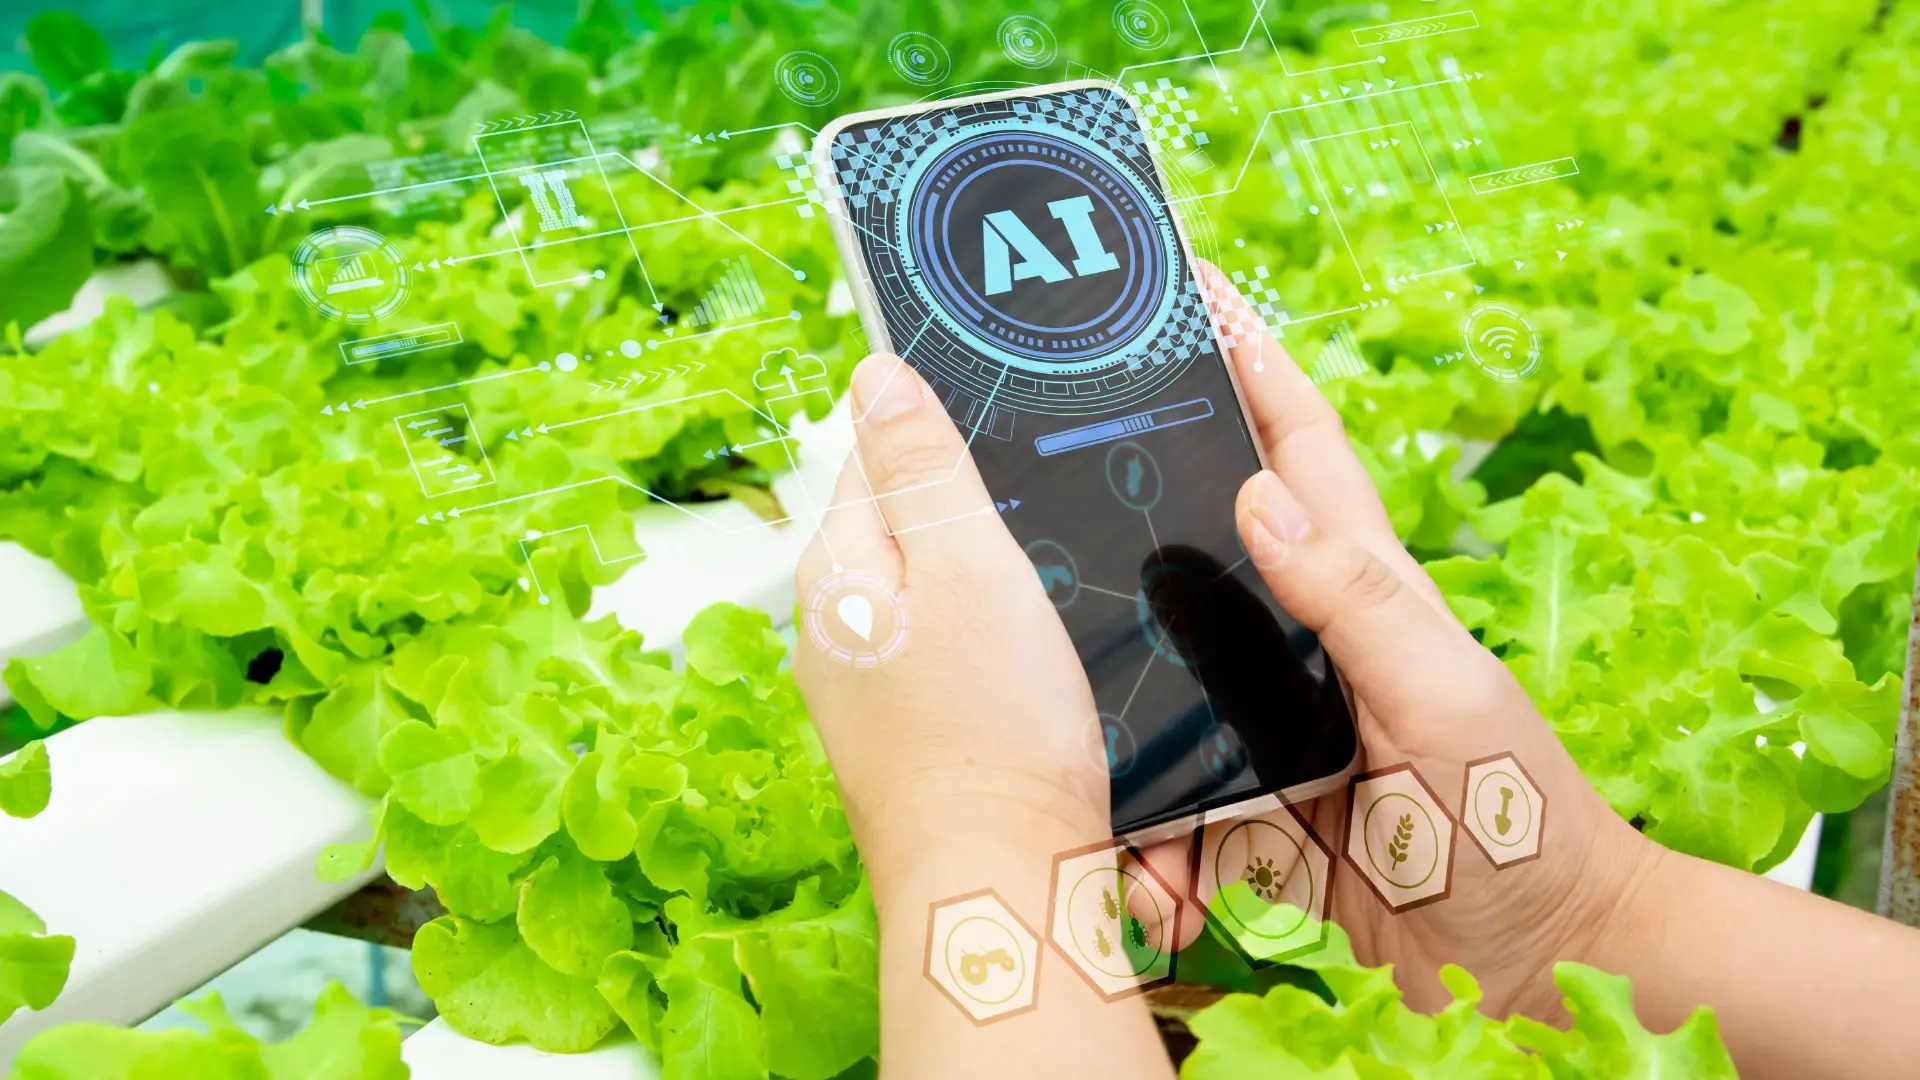 % Discover how AI Agriculture is transforming hydroponics technology and creating eco-friendly farming methods that are more efficient than ever before. Get the facts here!